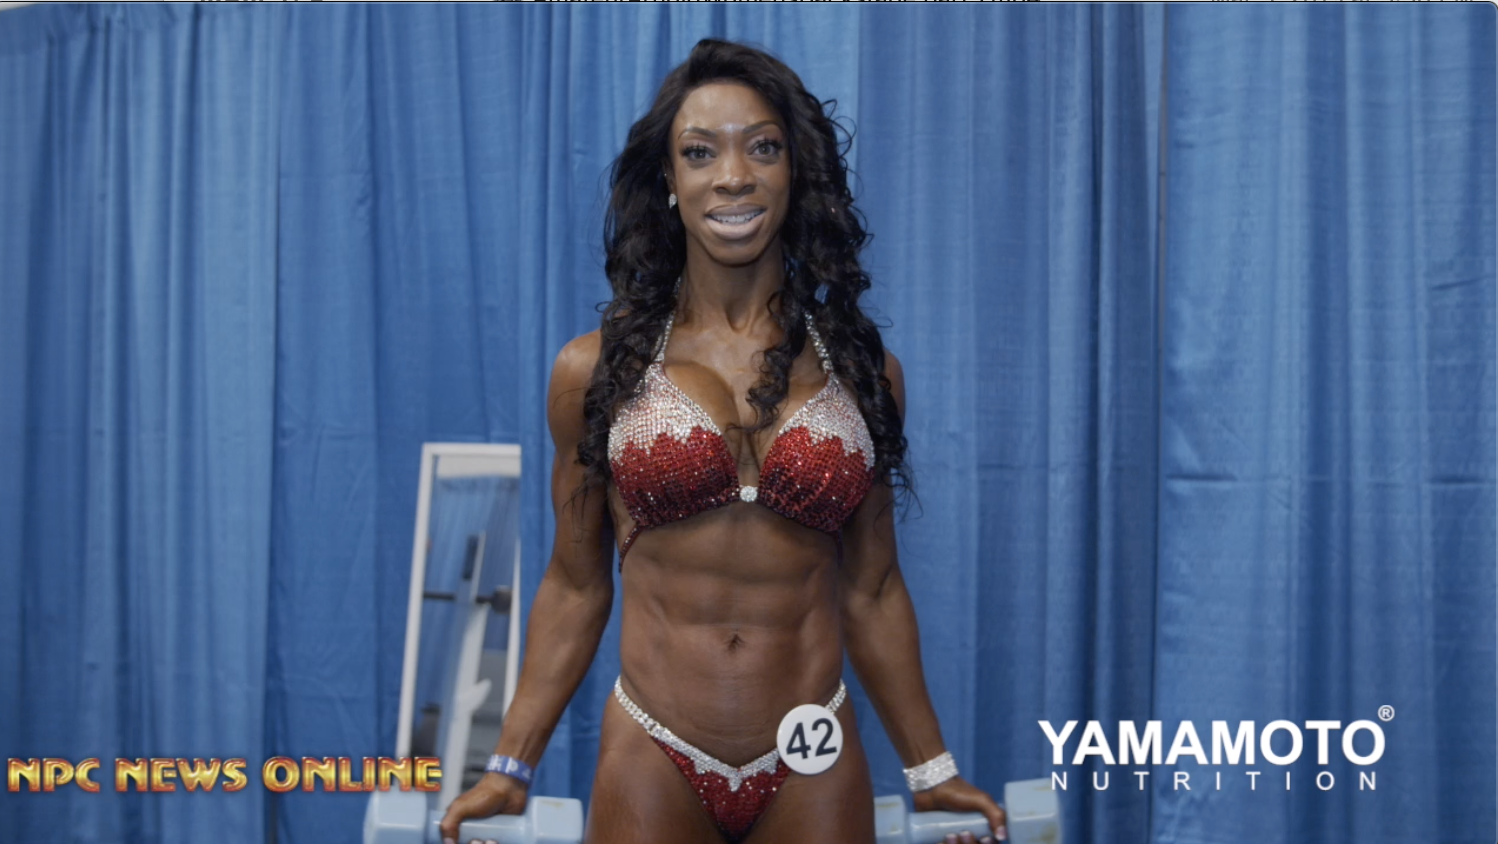 amateur women s fitness competitions